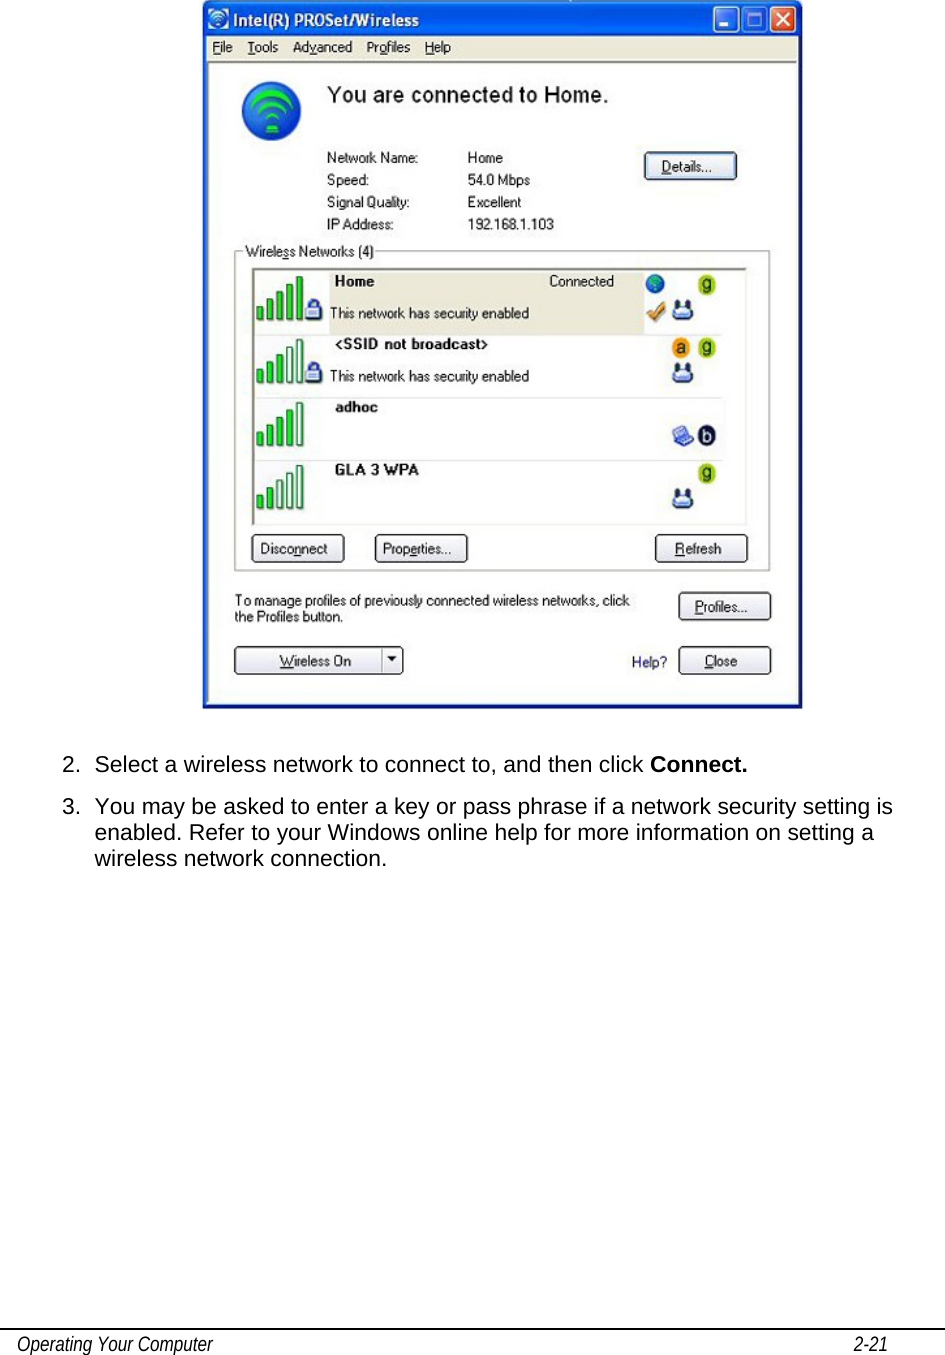    Operating Your Computer                                                                                                                                       2-21    2.  Select a wireless network to connect to, and then click Connect. 3.  You may be asked to enter a key or pass phrase if a network security setting is enabled. Refer to your Windows online help for more information on setting a wireless network connection. 